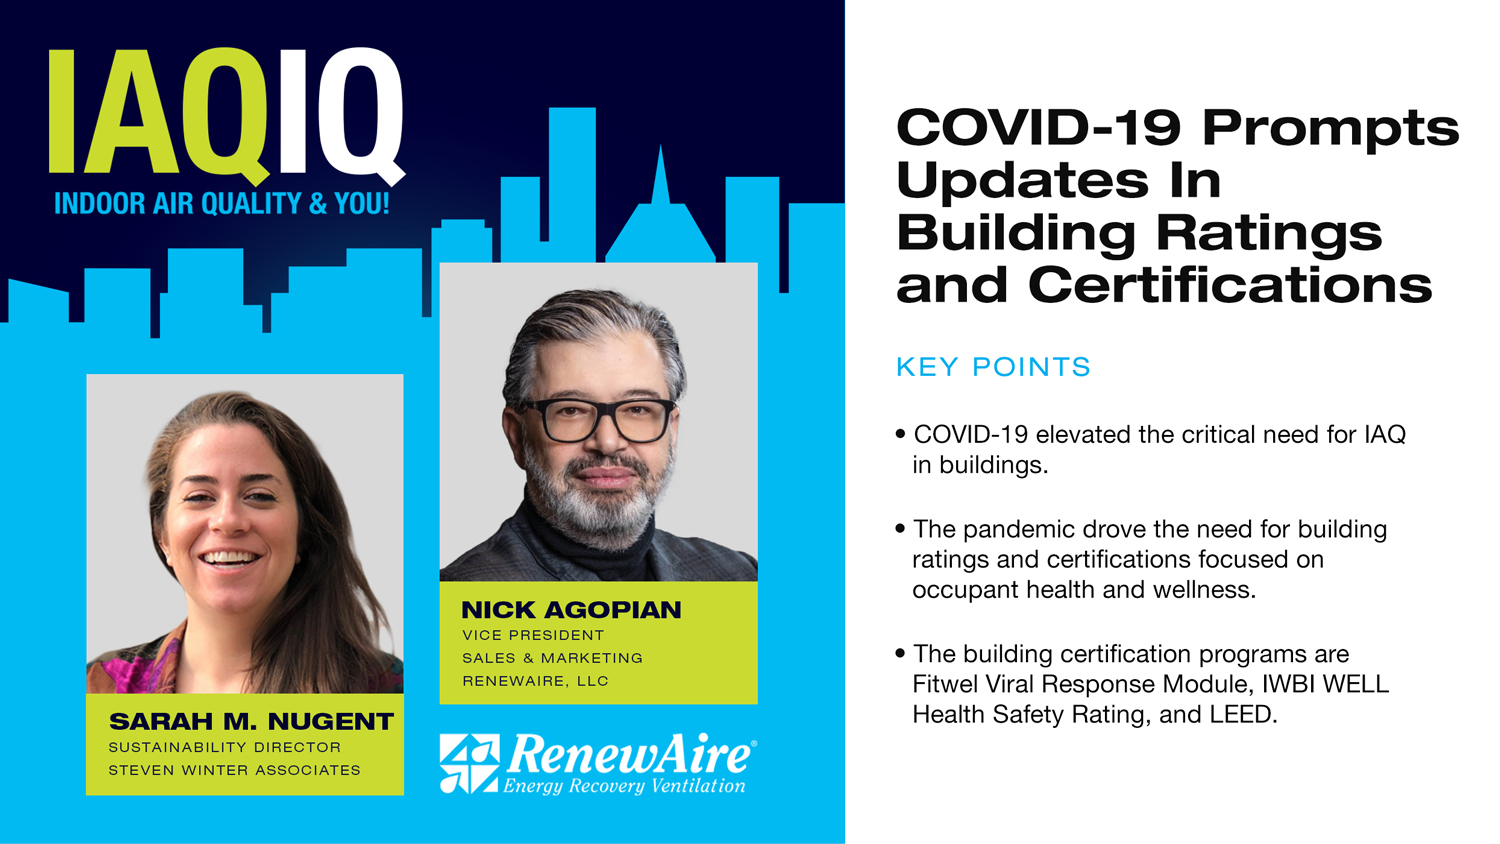 BUILDING RATINGS AND CERTIFICATIONS UPDATED IN RESPONSE TO COVID-19